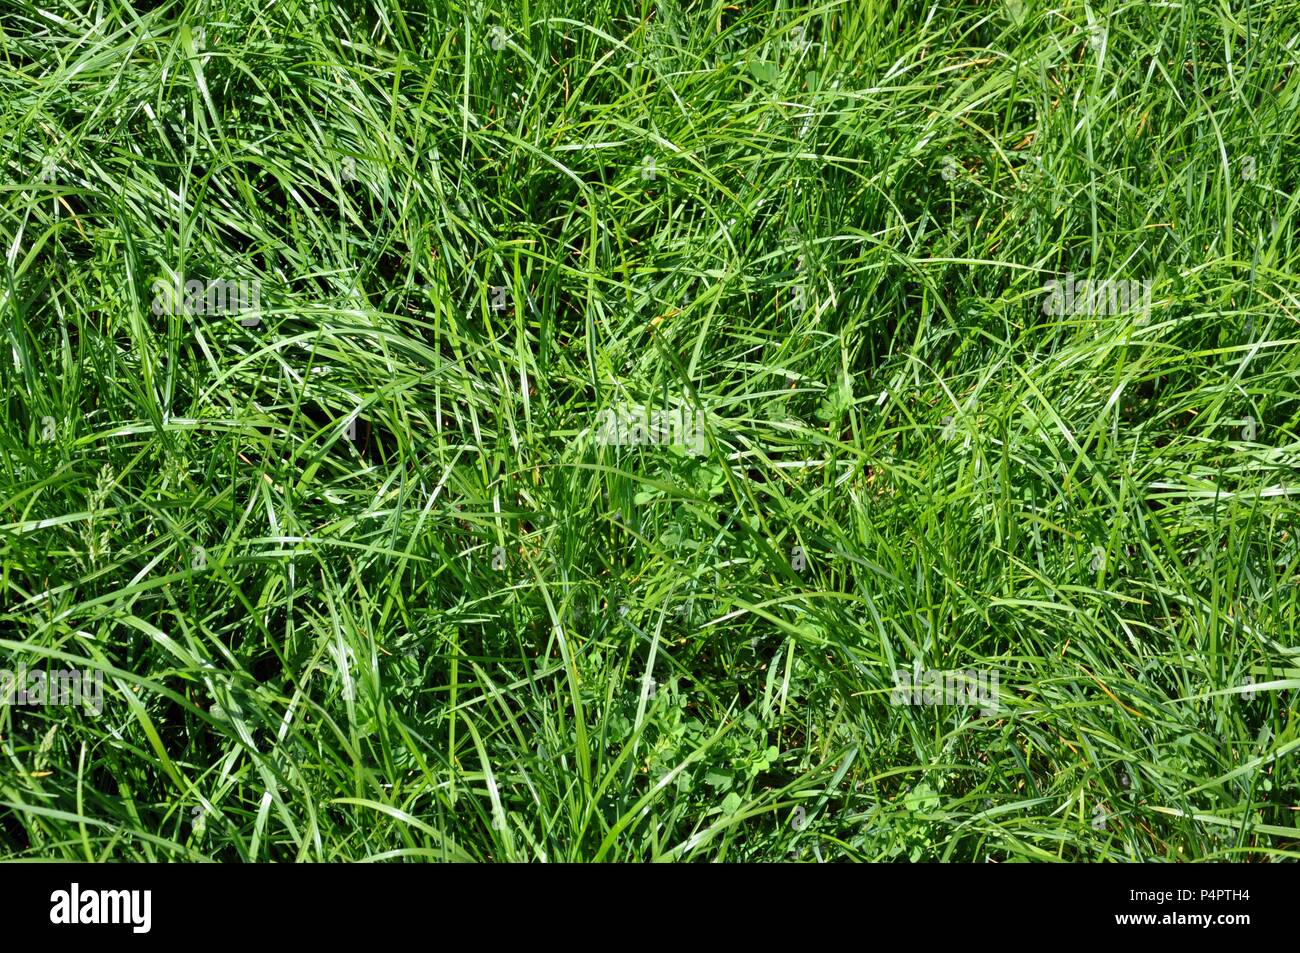 Green grass backdground, top view Stock Photo